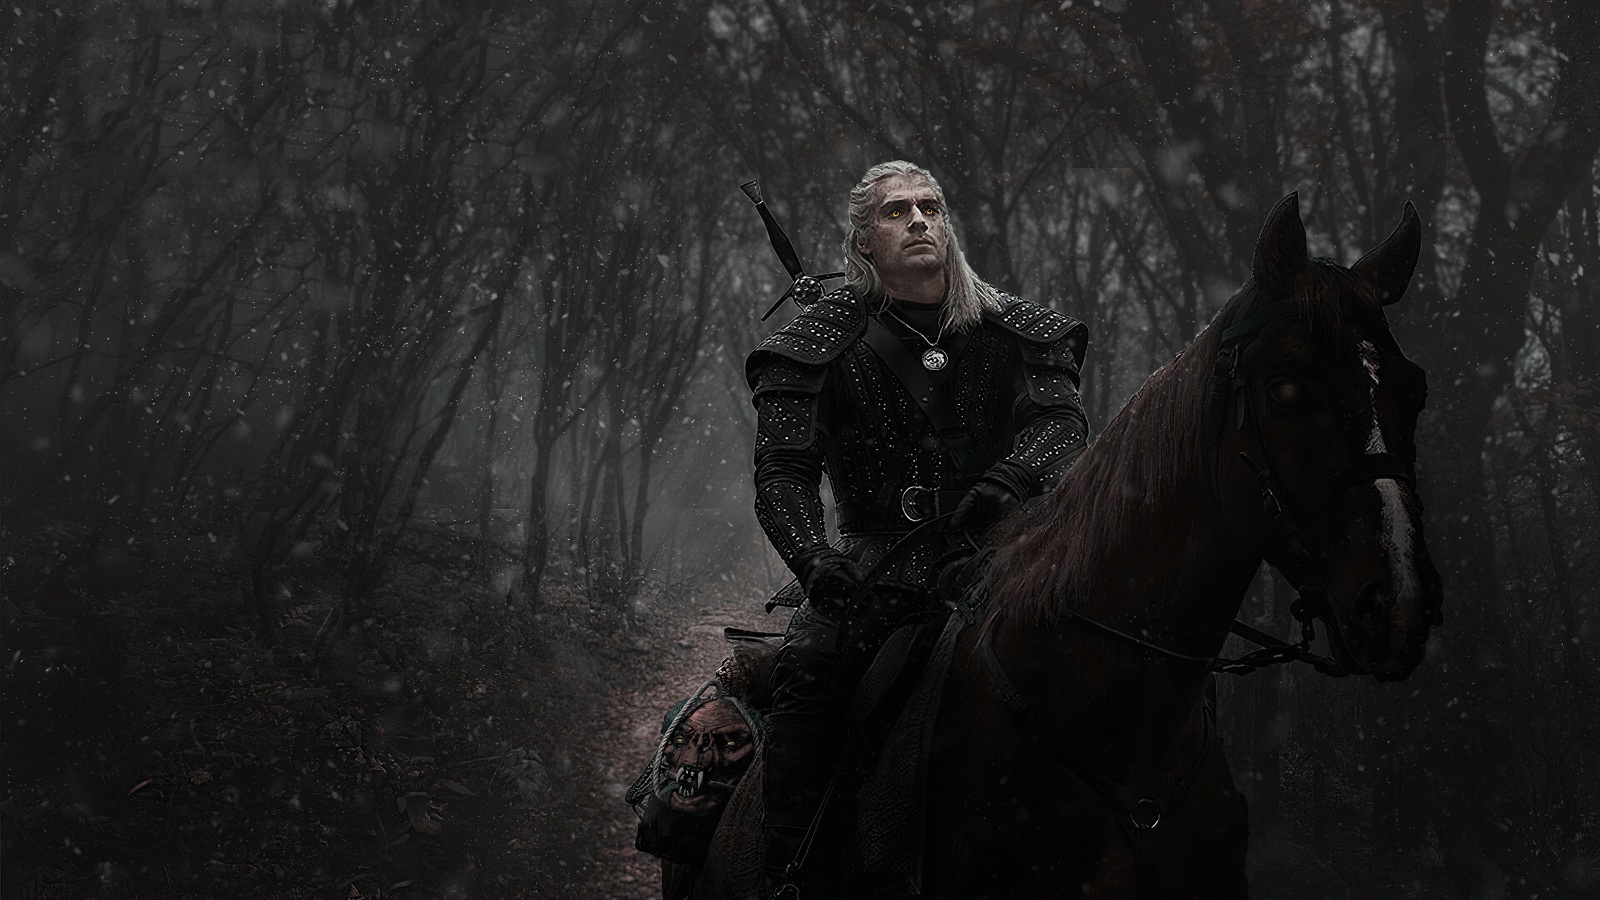 The Witcher Wallpaper 4K